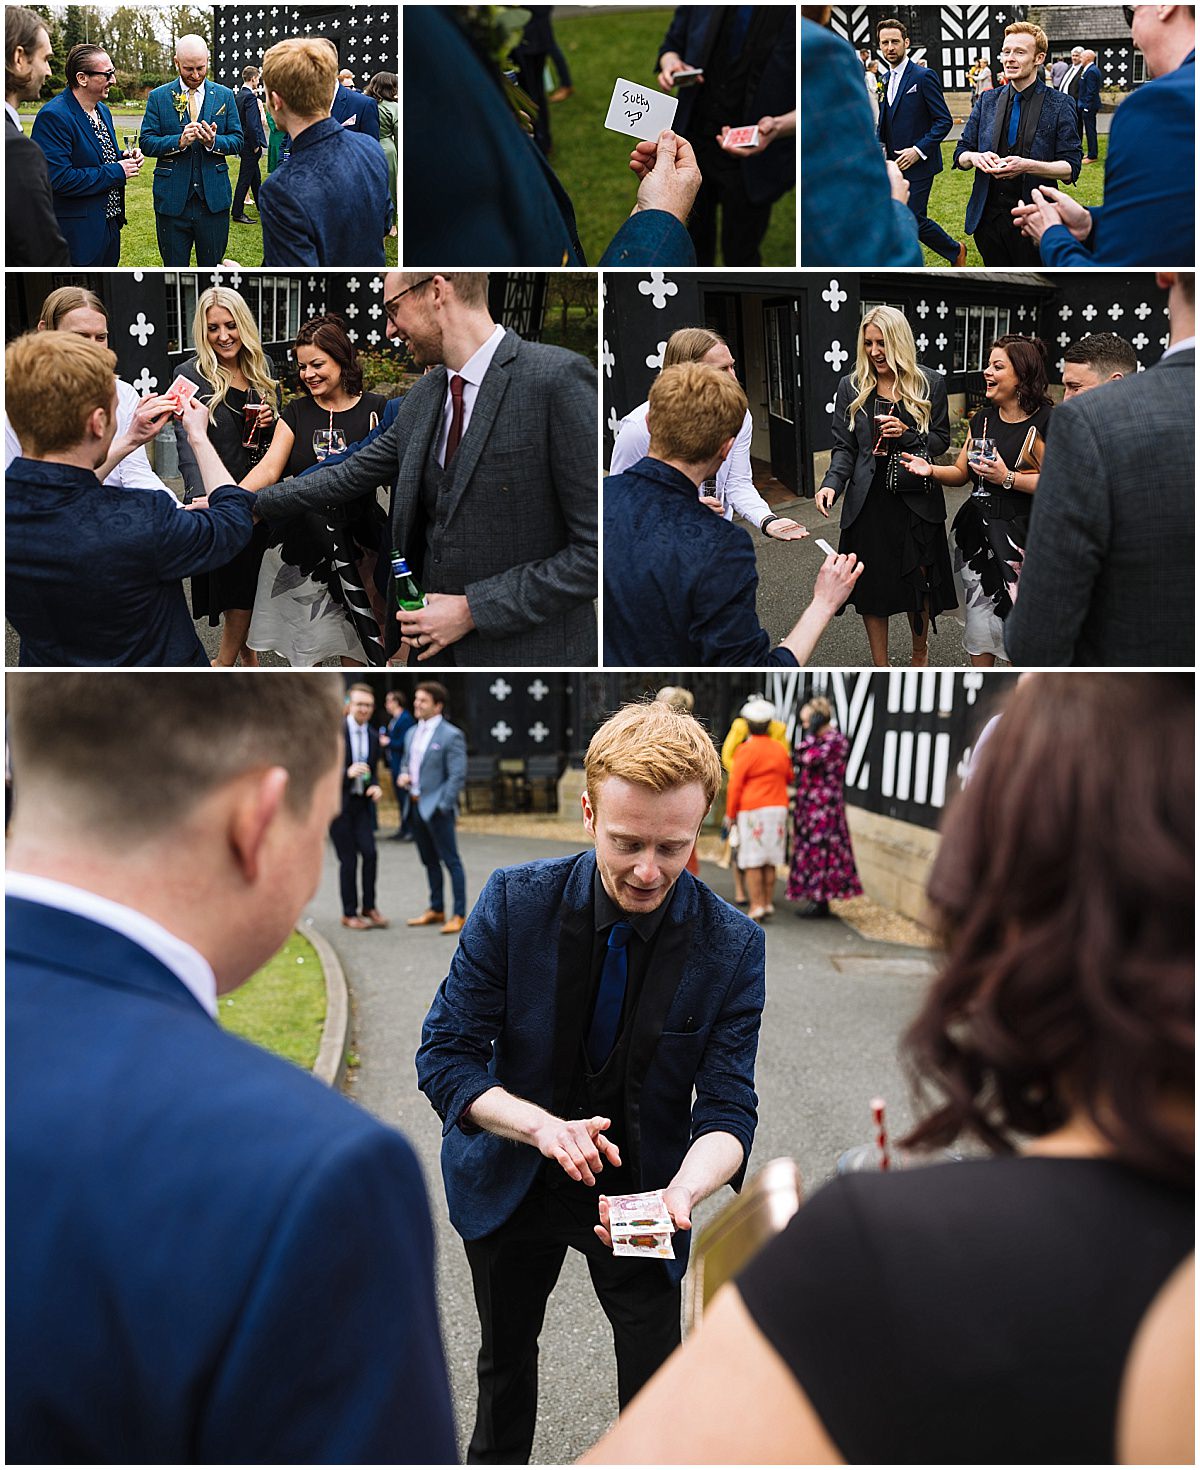 A collage of images showing a magician performing card tricks for a group of elegantly dressed people at a samlesbury hall wedding. The magician, holding cards and engaging with the guests, is featured in each of the five pictures, with onlookers expressing surprise and amusement.